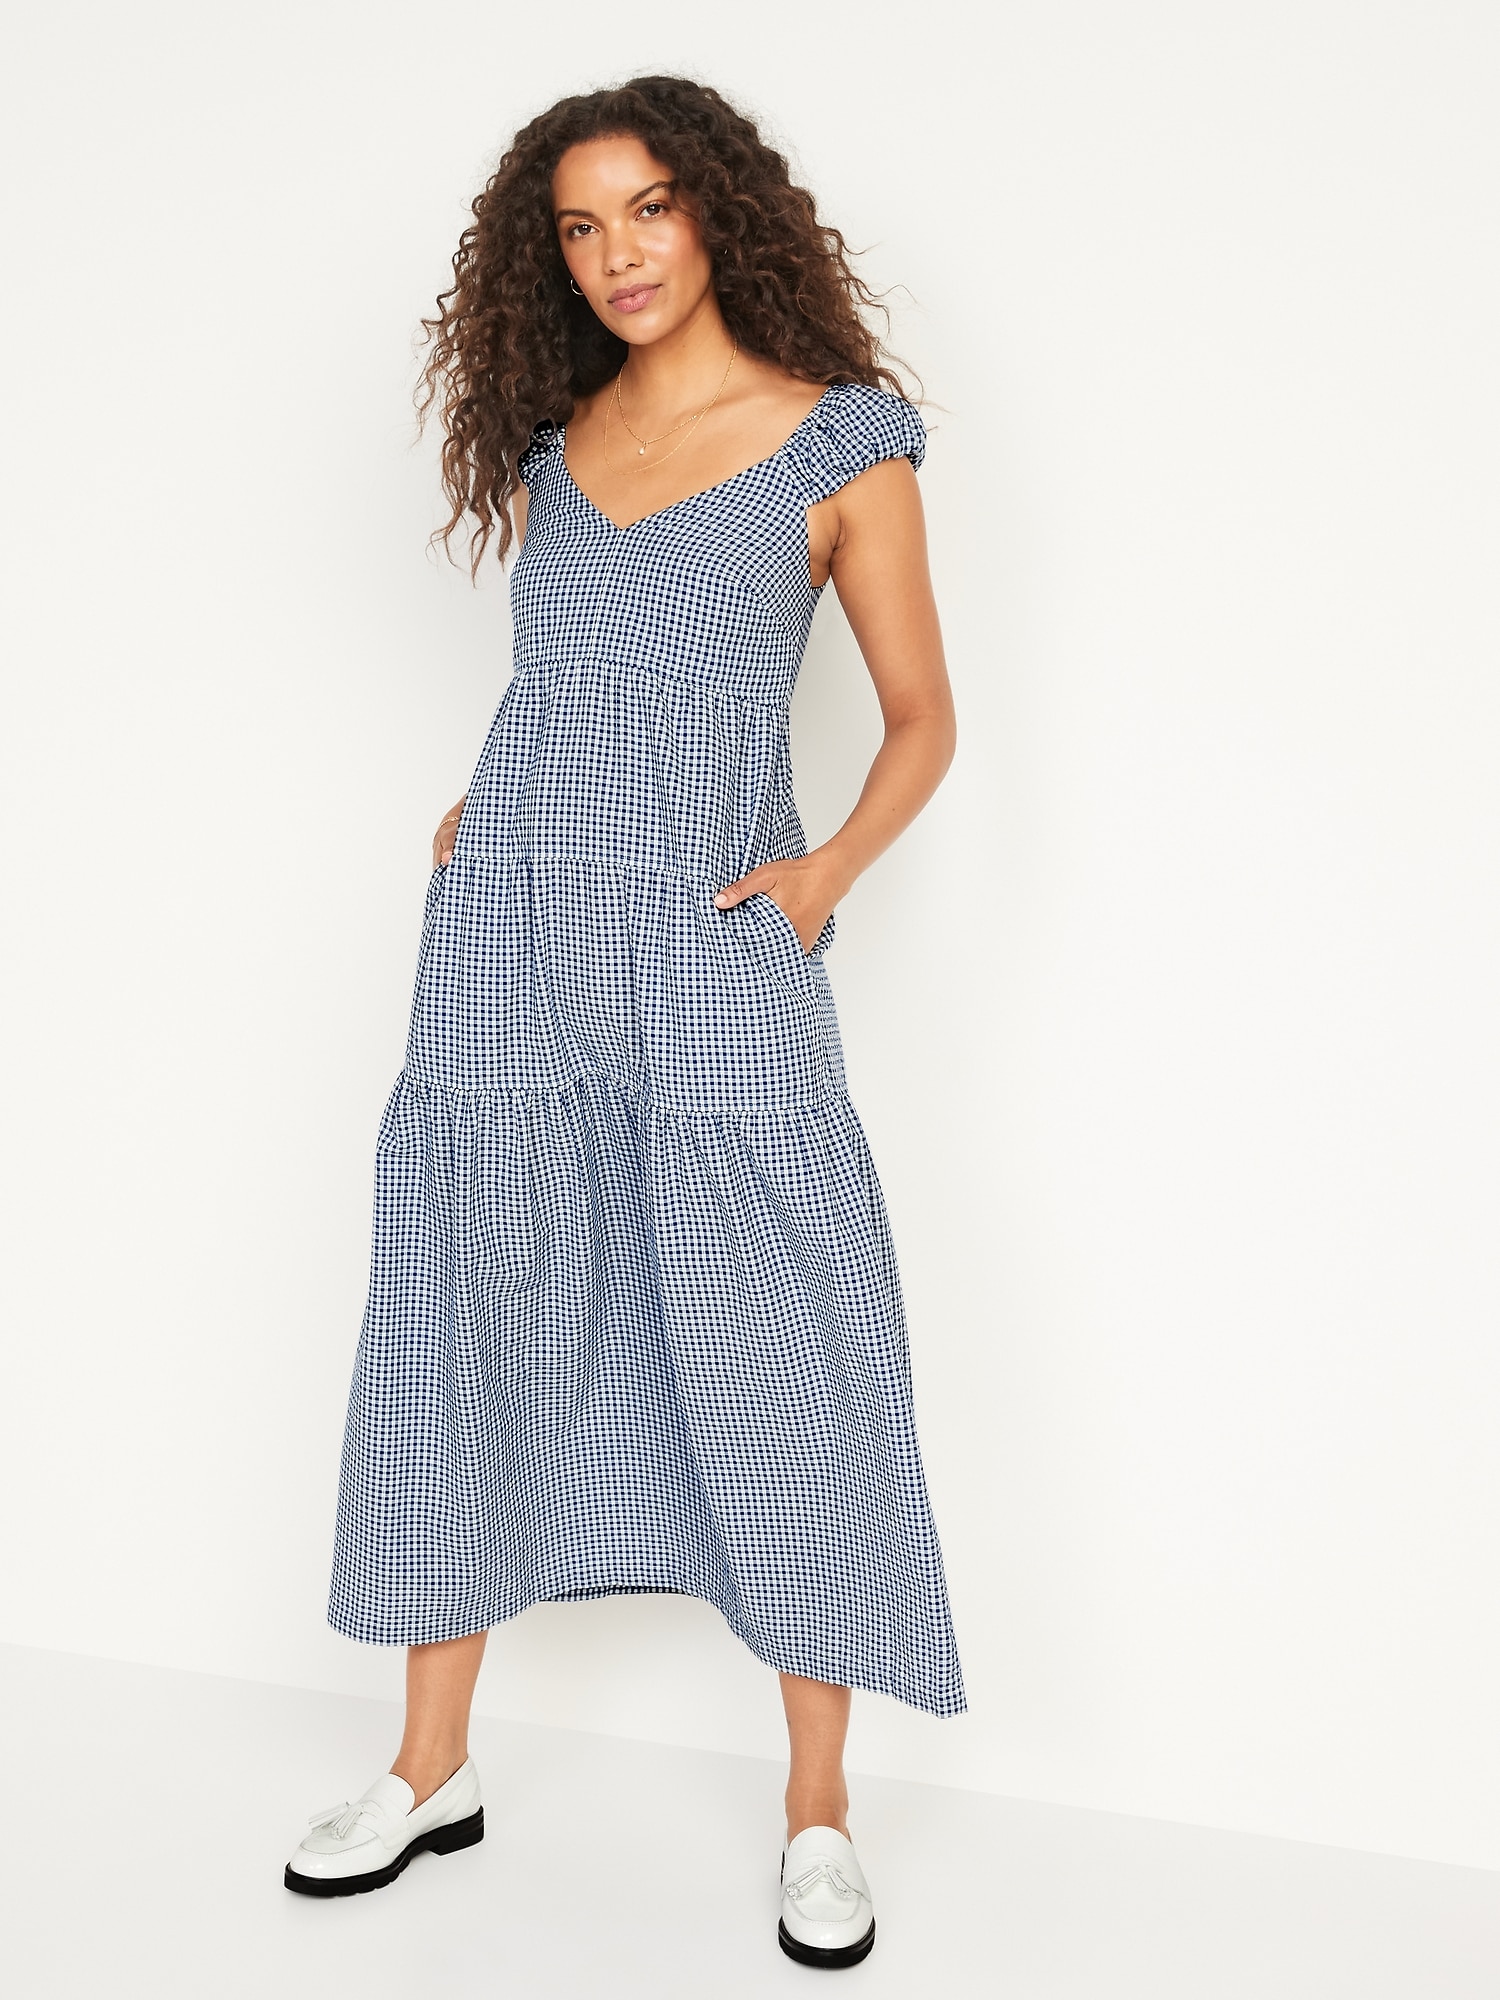 Oldnavy Fit & Flare Tiered Seersucker All-Day Maxi Dress for Women